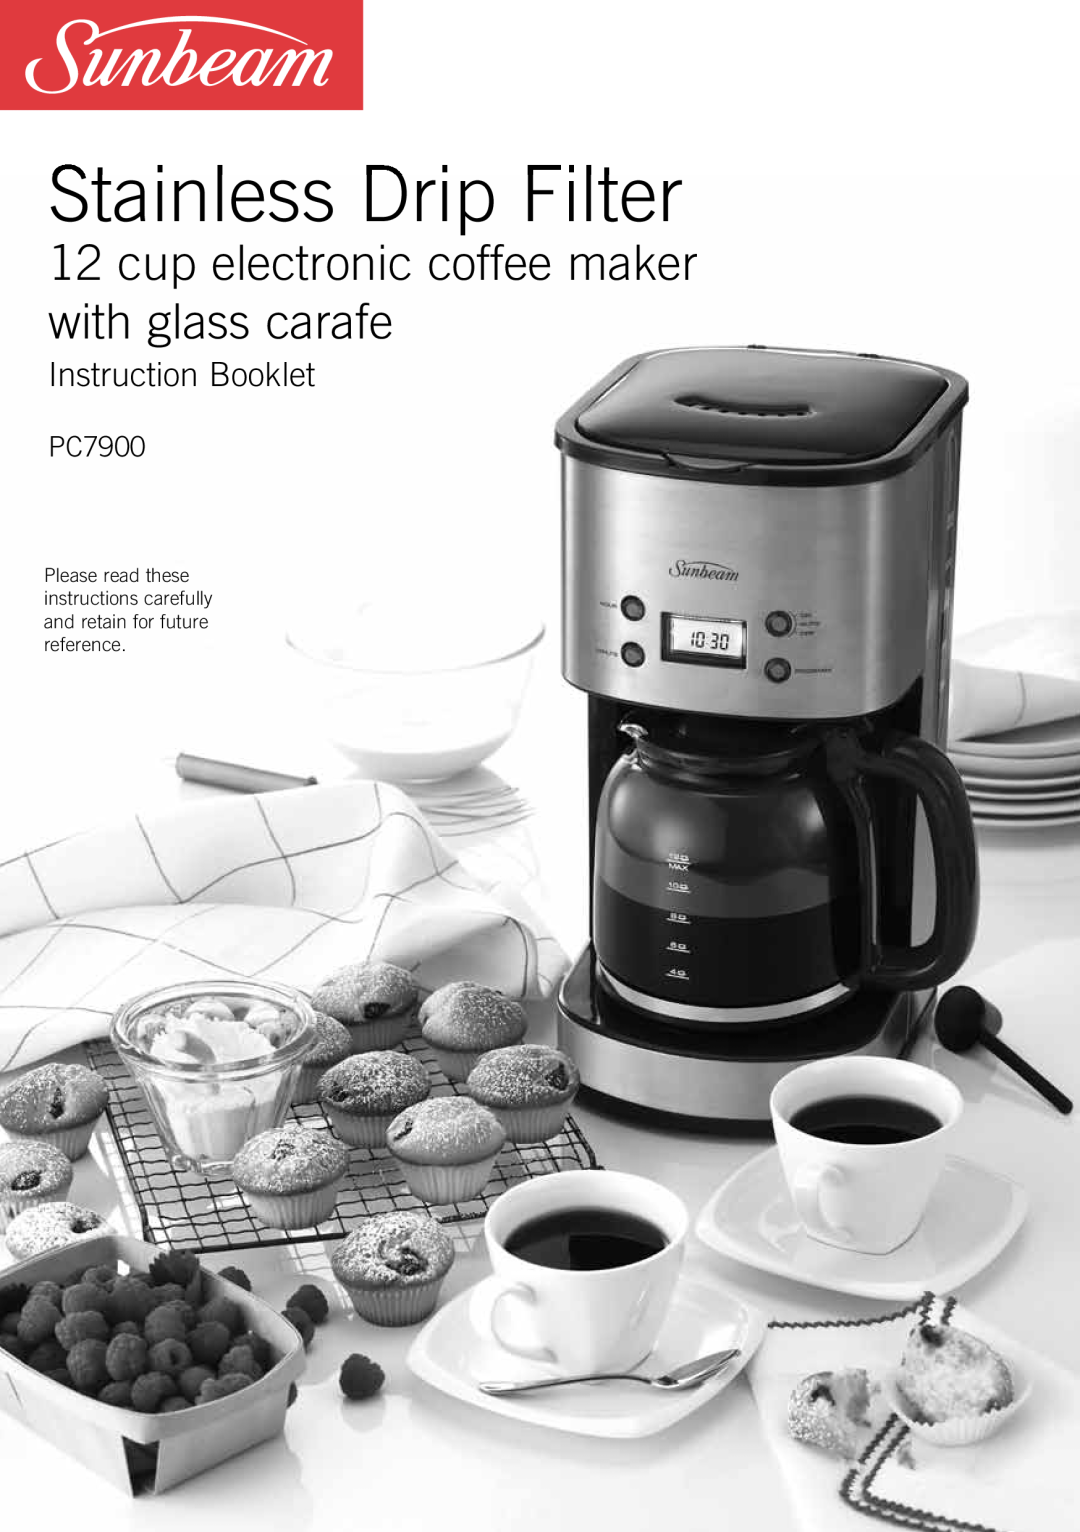 Sunbeam PC7900 manual Stainless Drip Filter, cup electronic coffee maker with glass carafe, Instruction Booklet 